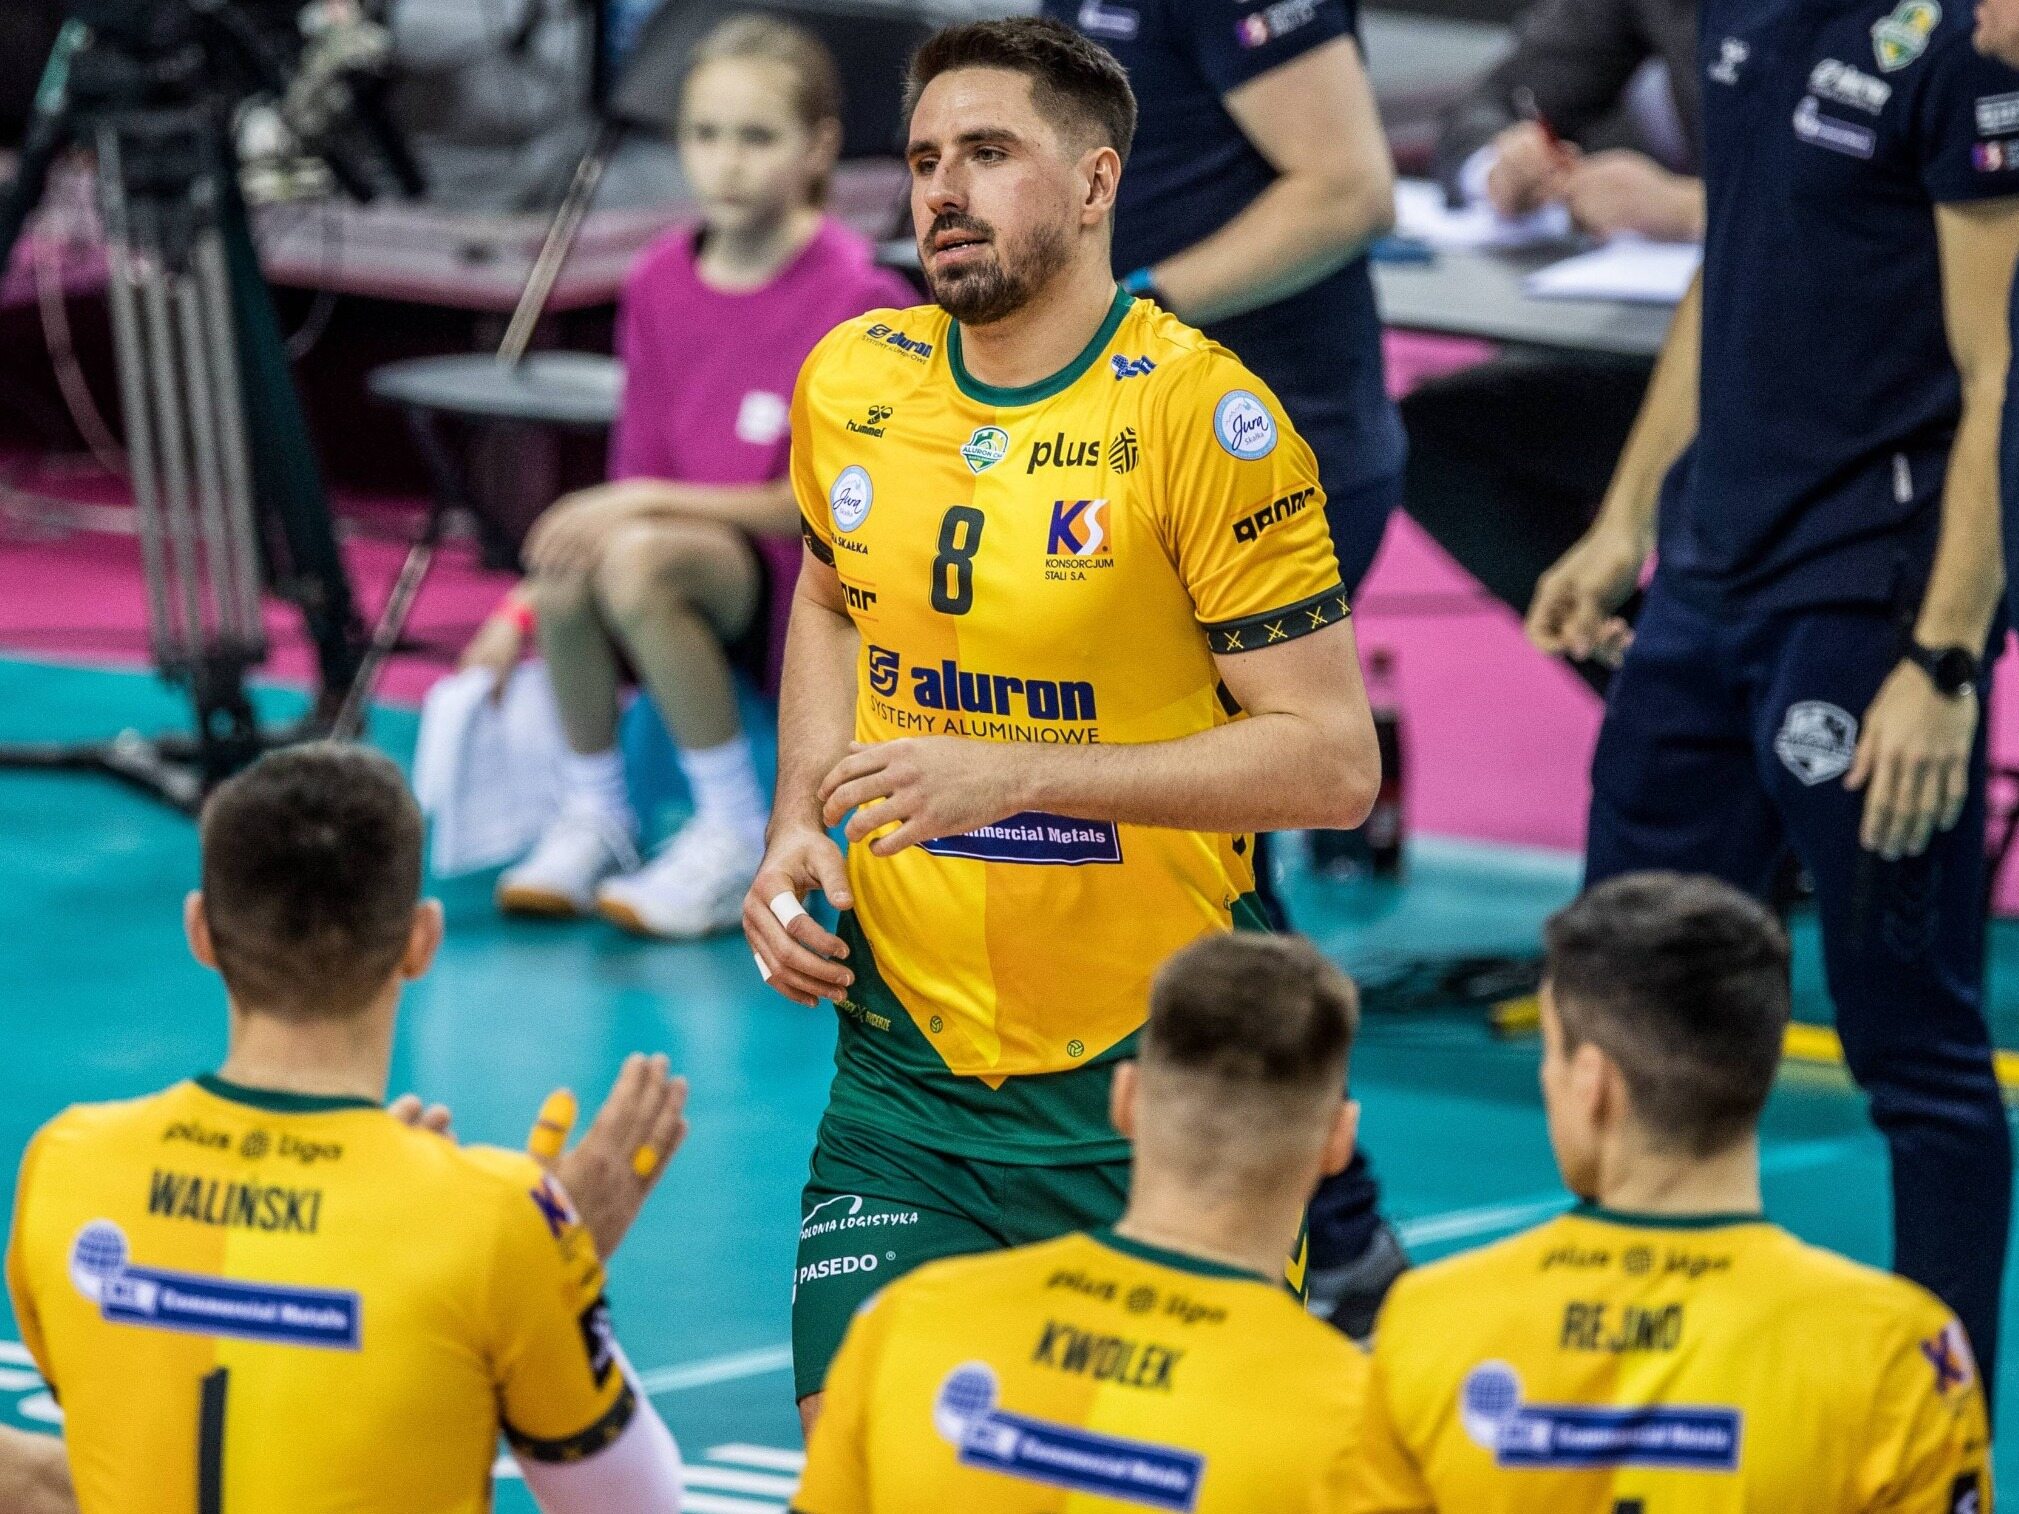 Warta Zawiercie volleyball player with a serious injury.  He will even miss most of the season